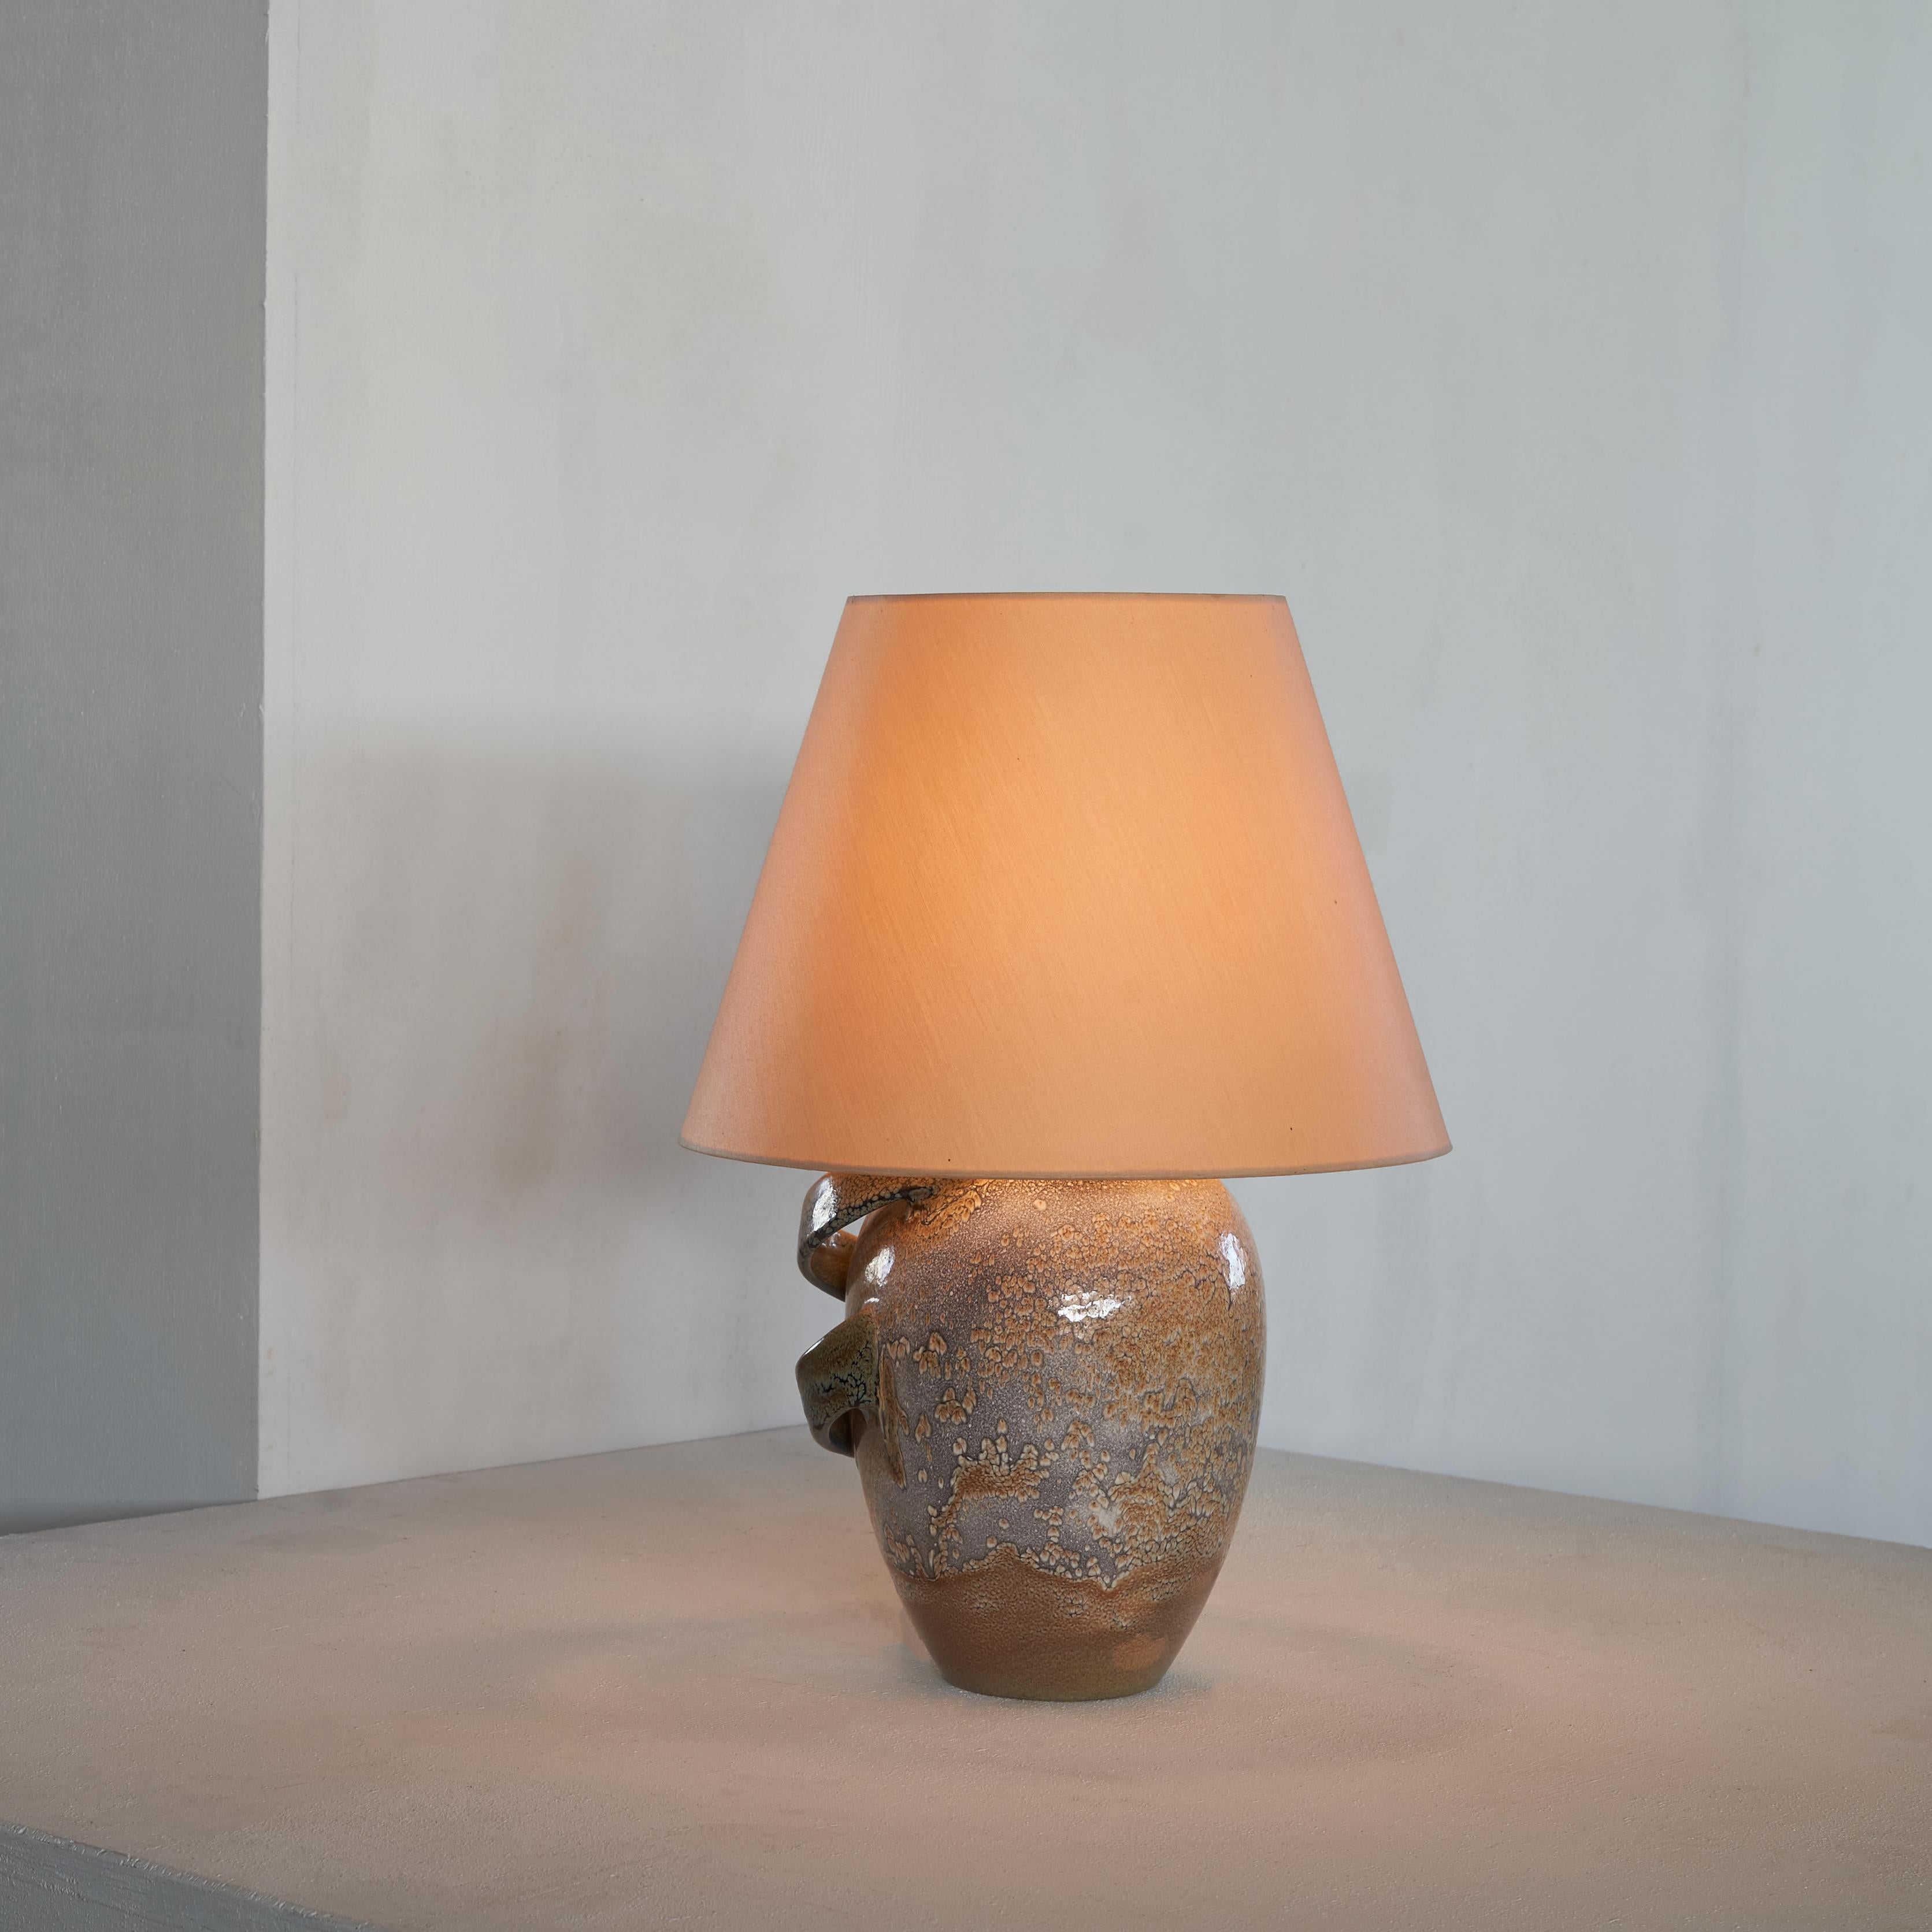 Sculptural Ceramic Table Lamp, The Netherlands, first half of the 20th century.

This is a special ceramic lamp. Both the form and the execution are expressive and interesting. The lamp has a classic shape and beautiful glaze and color. In